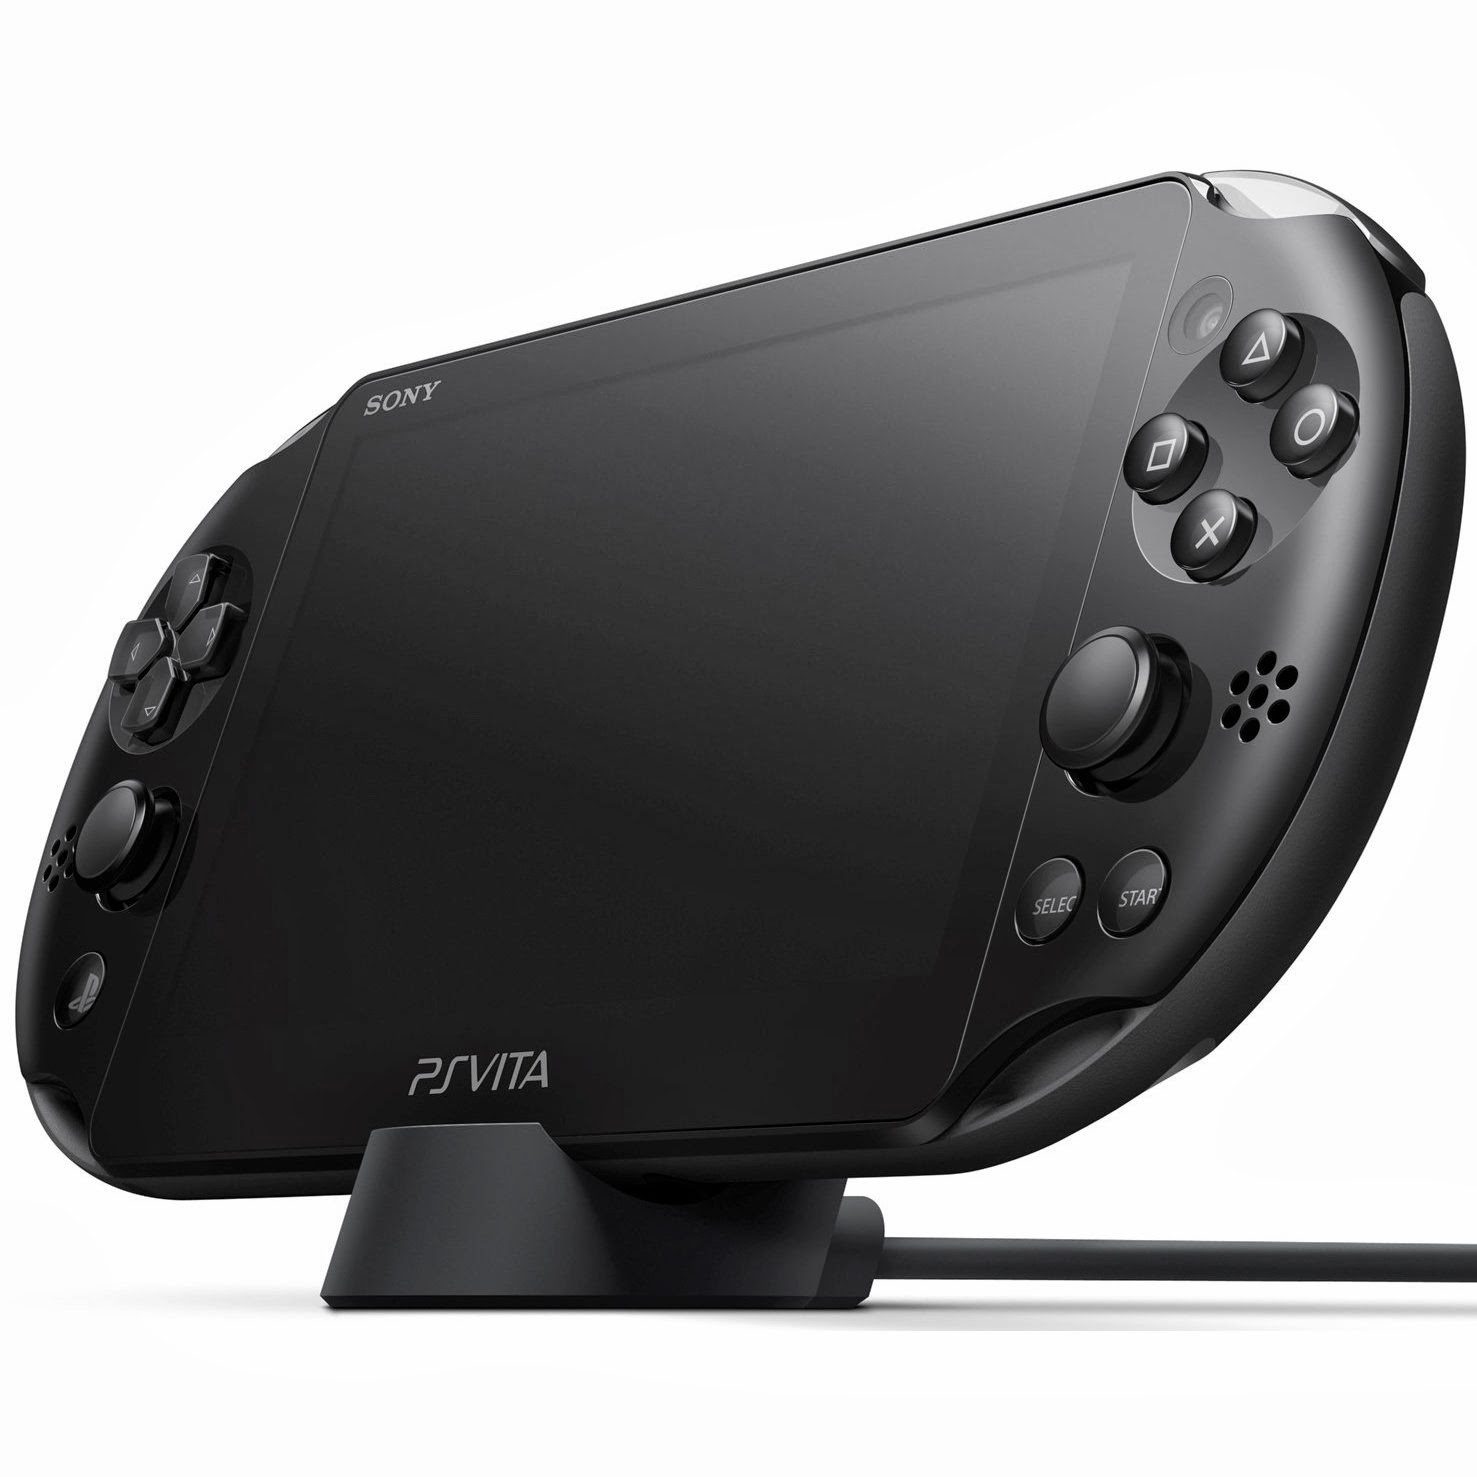 Stand easy for a new release date for the Vita PCH-2000 dock